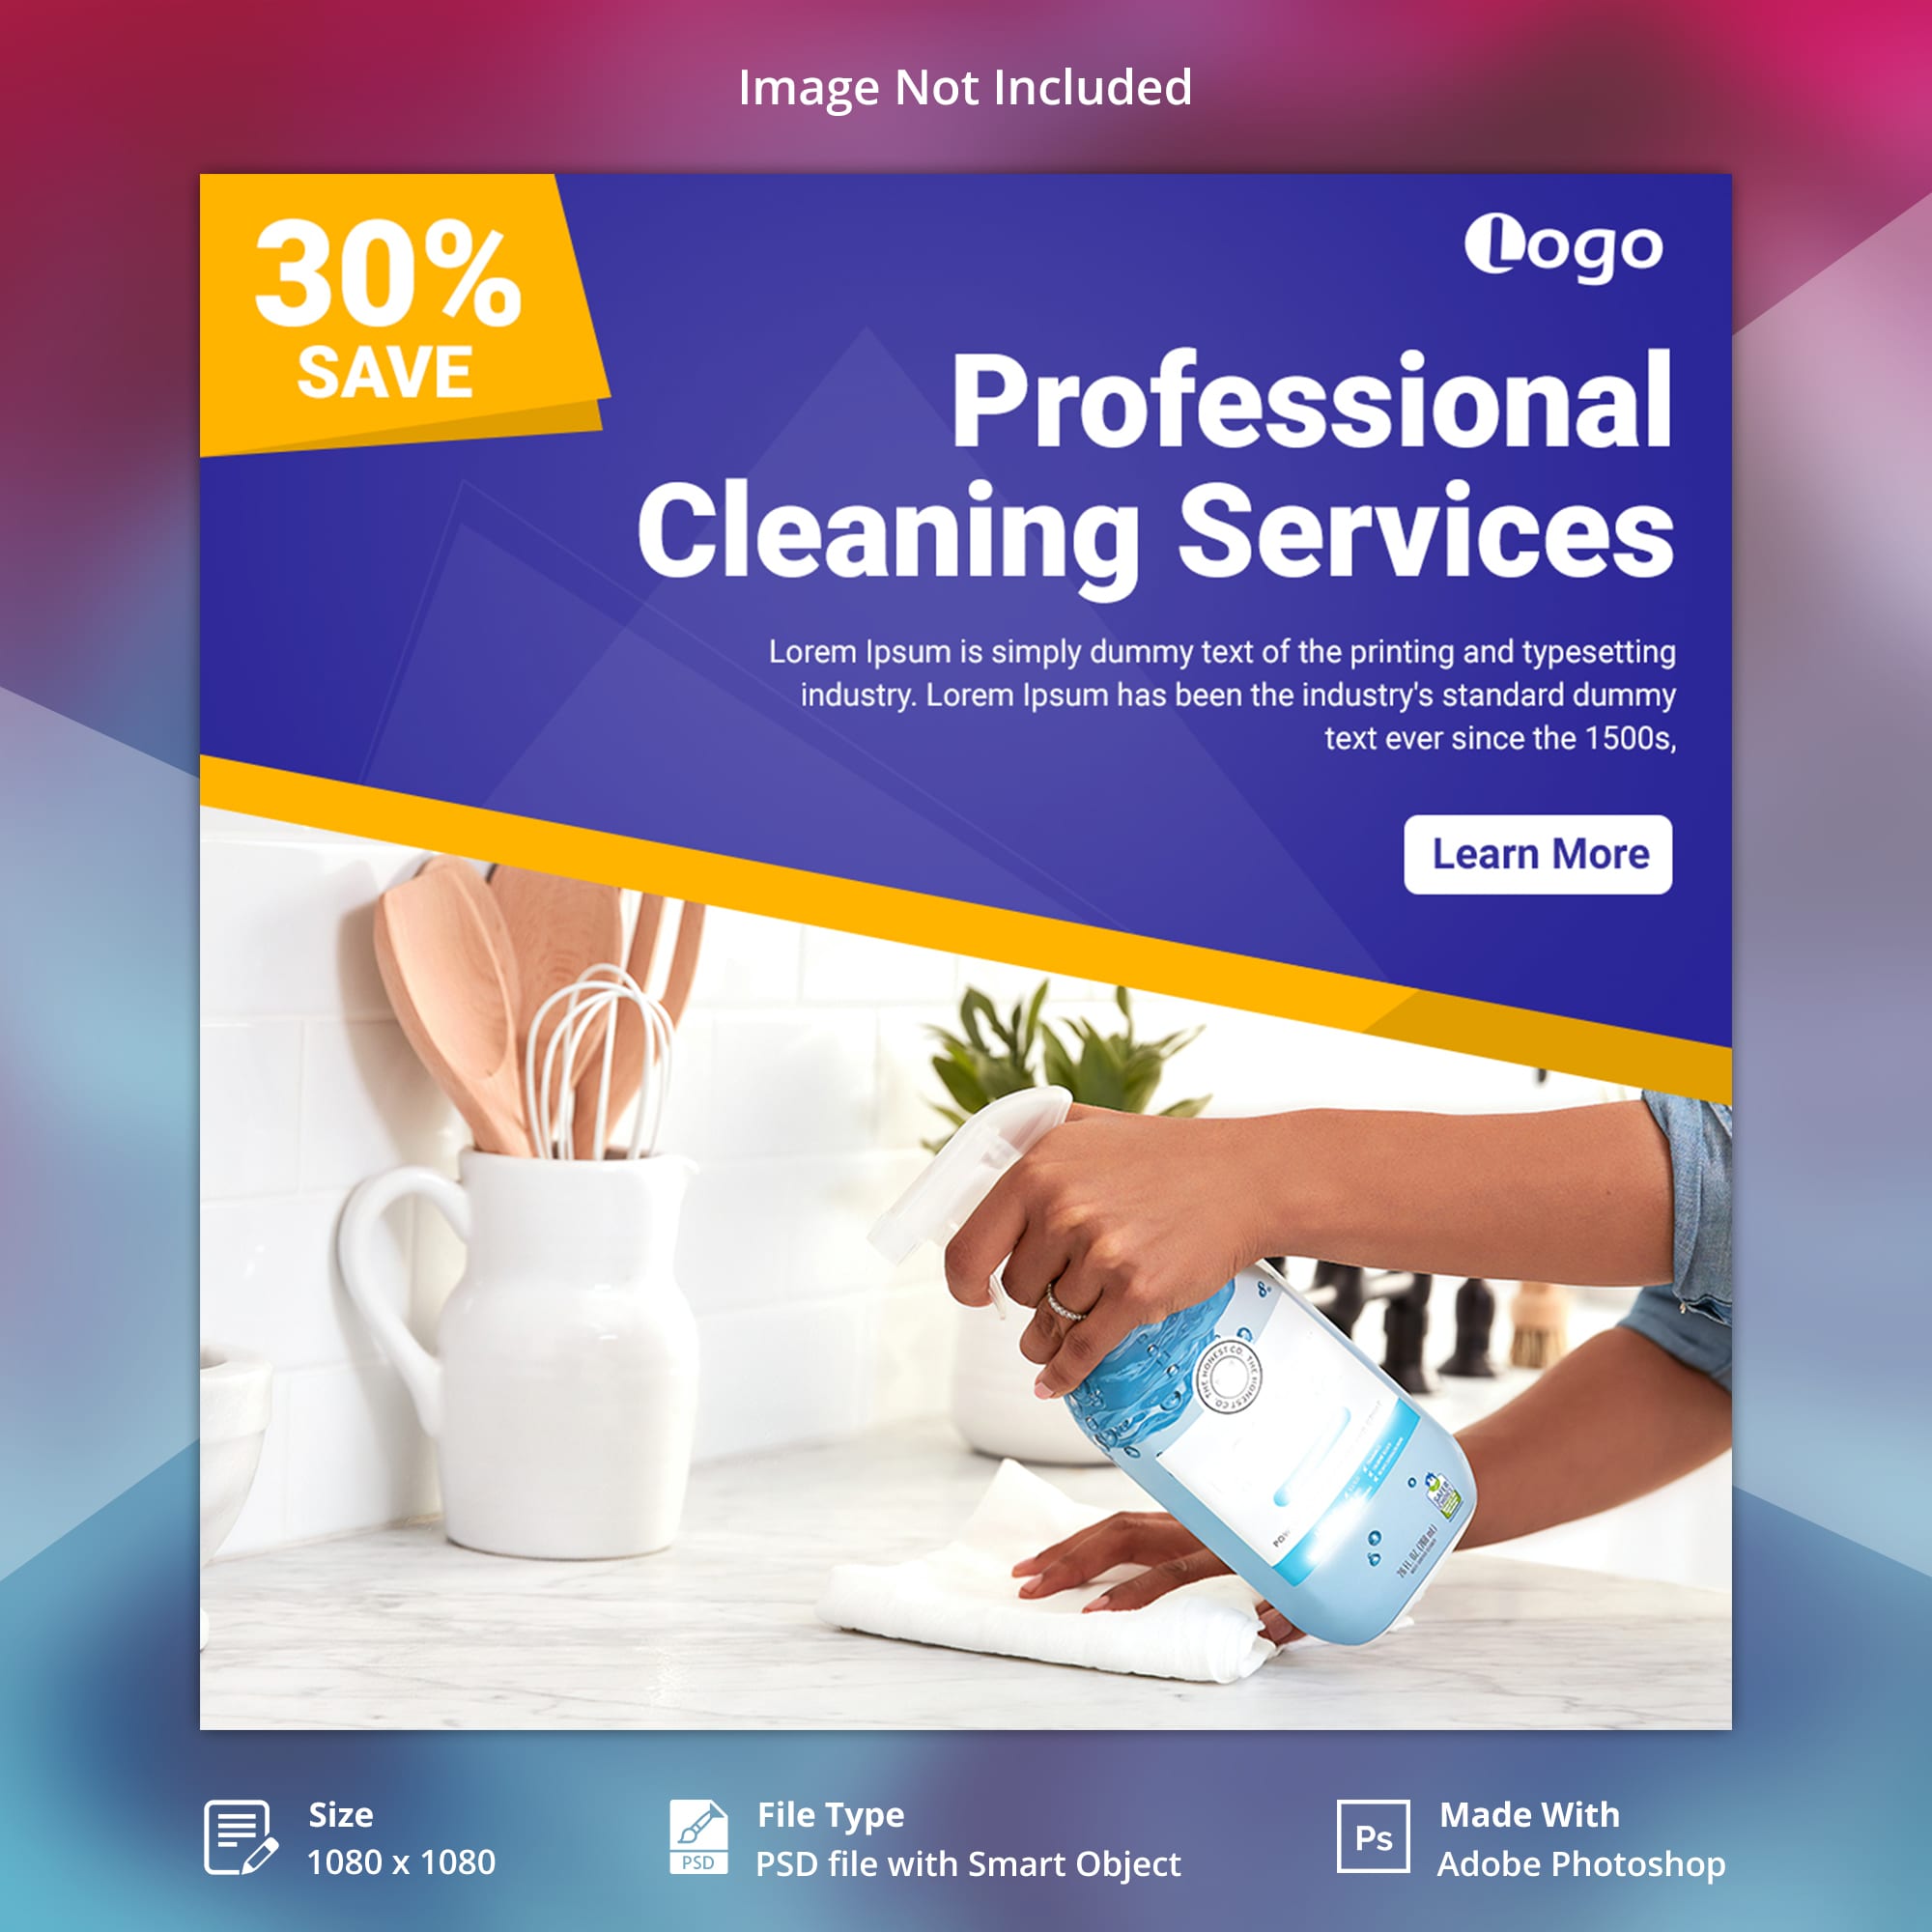 Professional Cleaning Services brochure